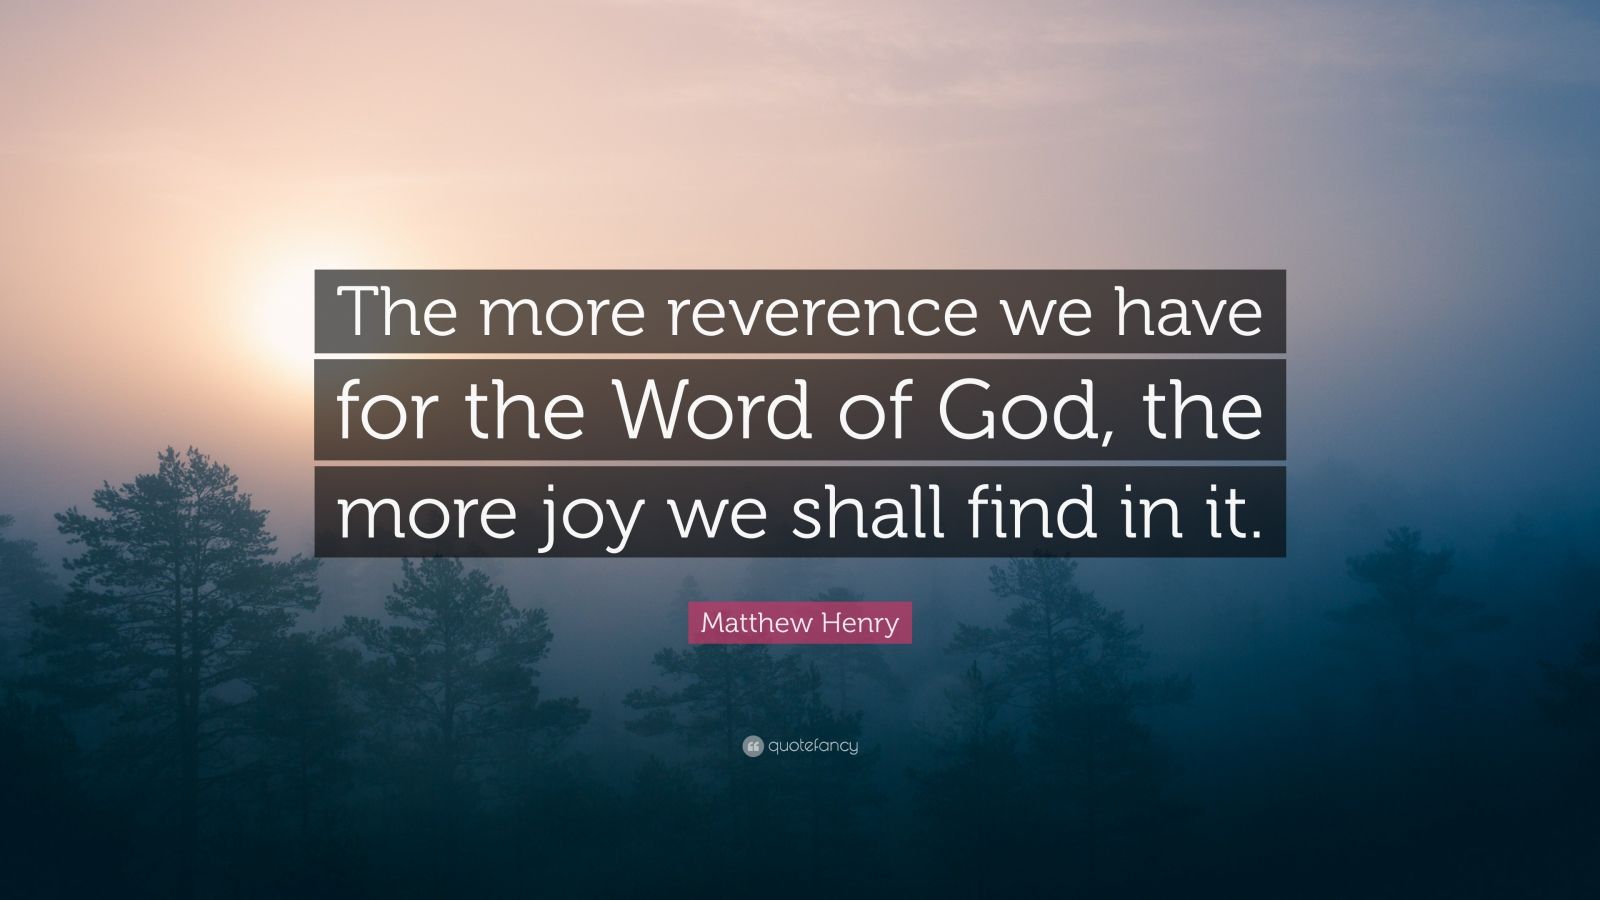 Matthew Henry Quote: “The more reverence we have for the Word of God